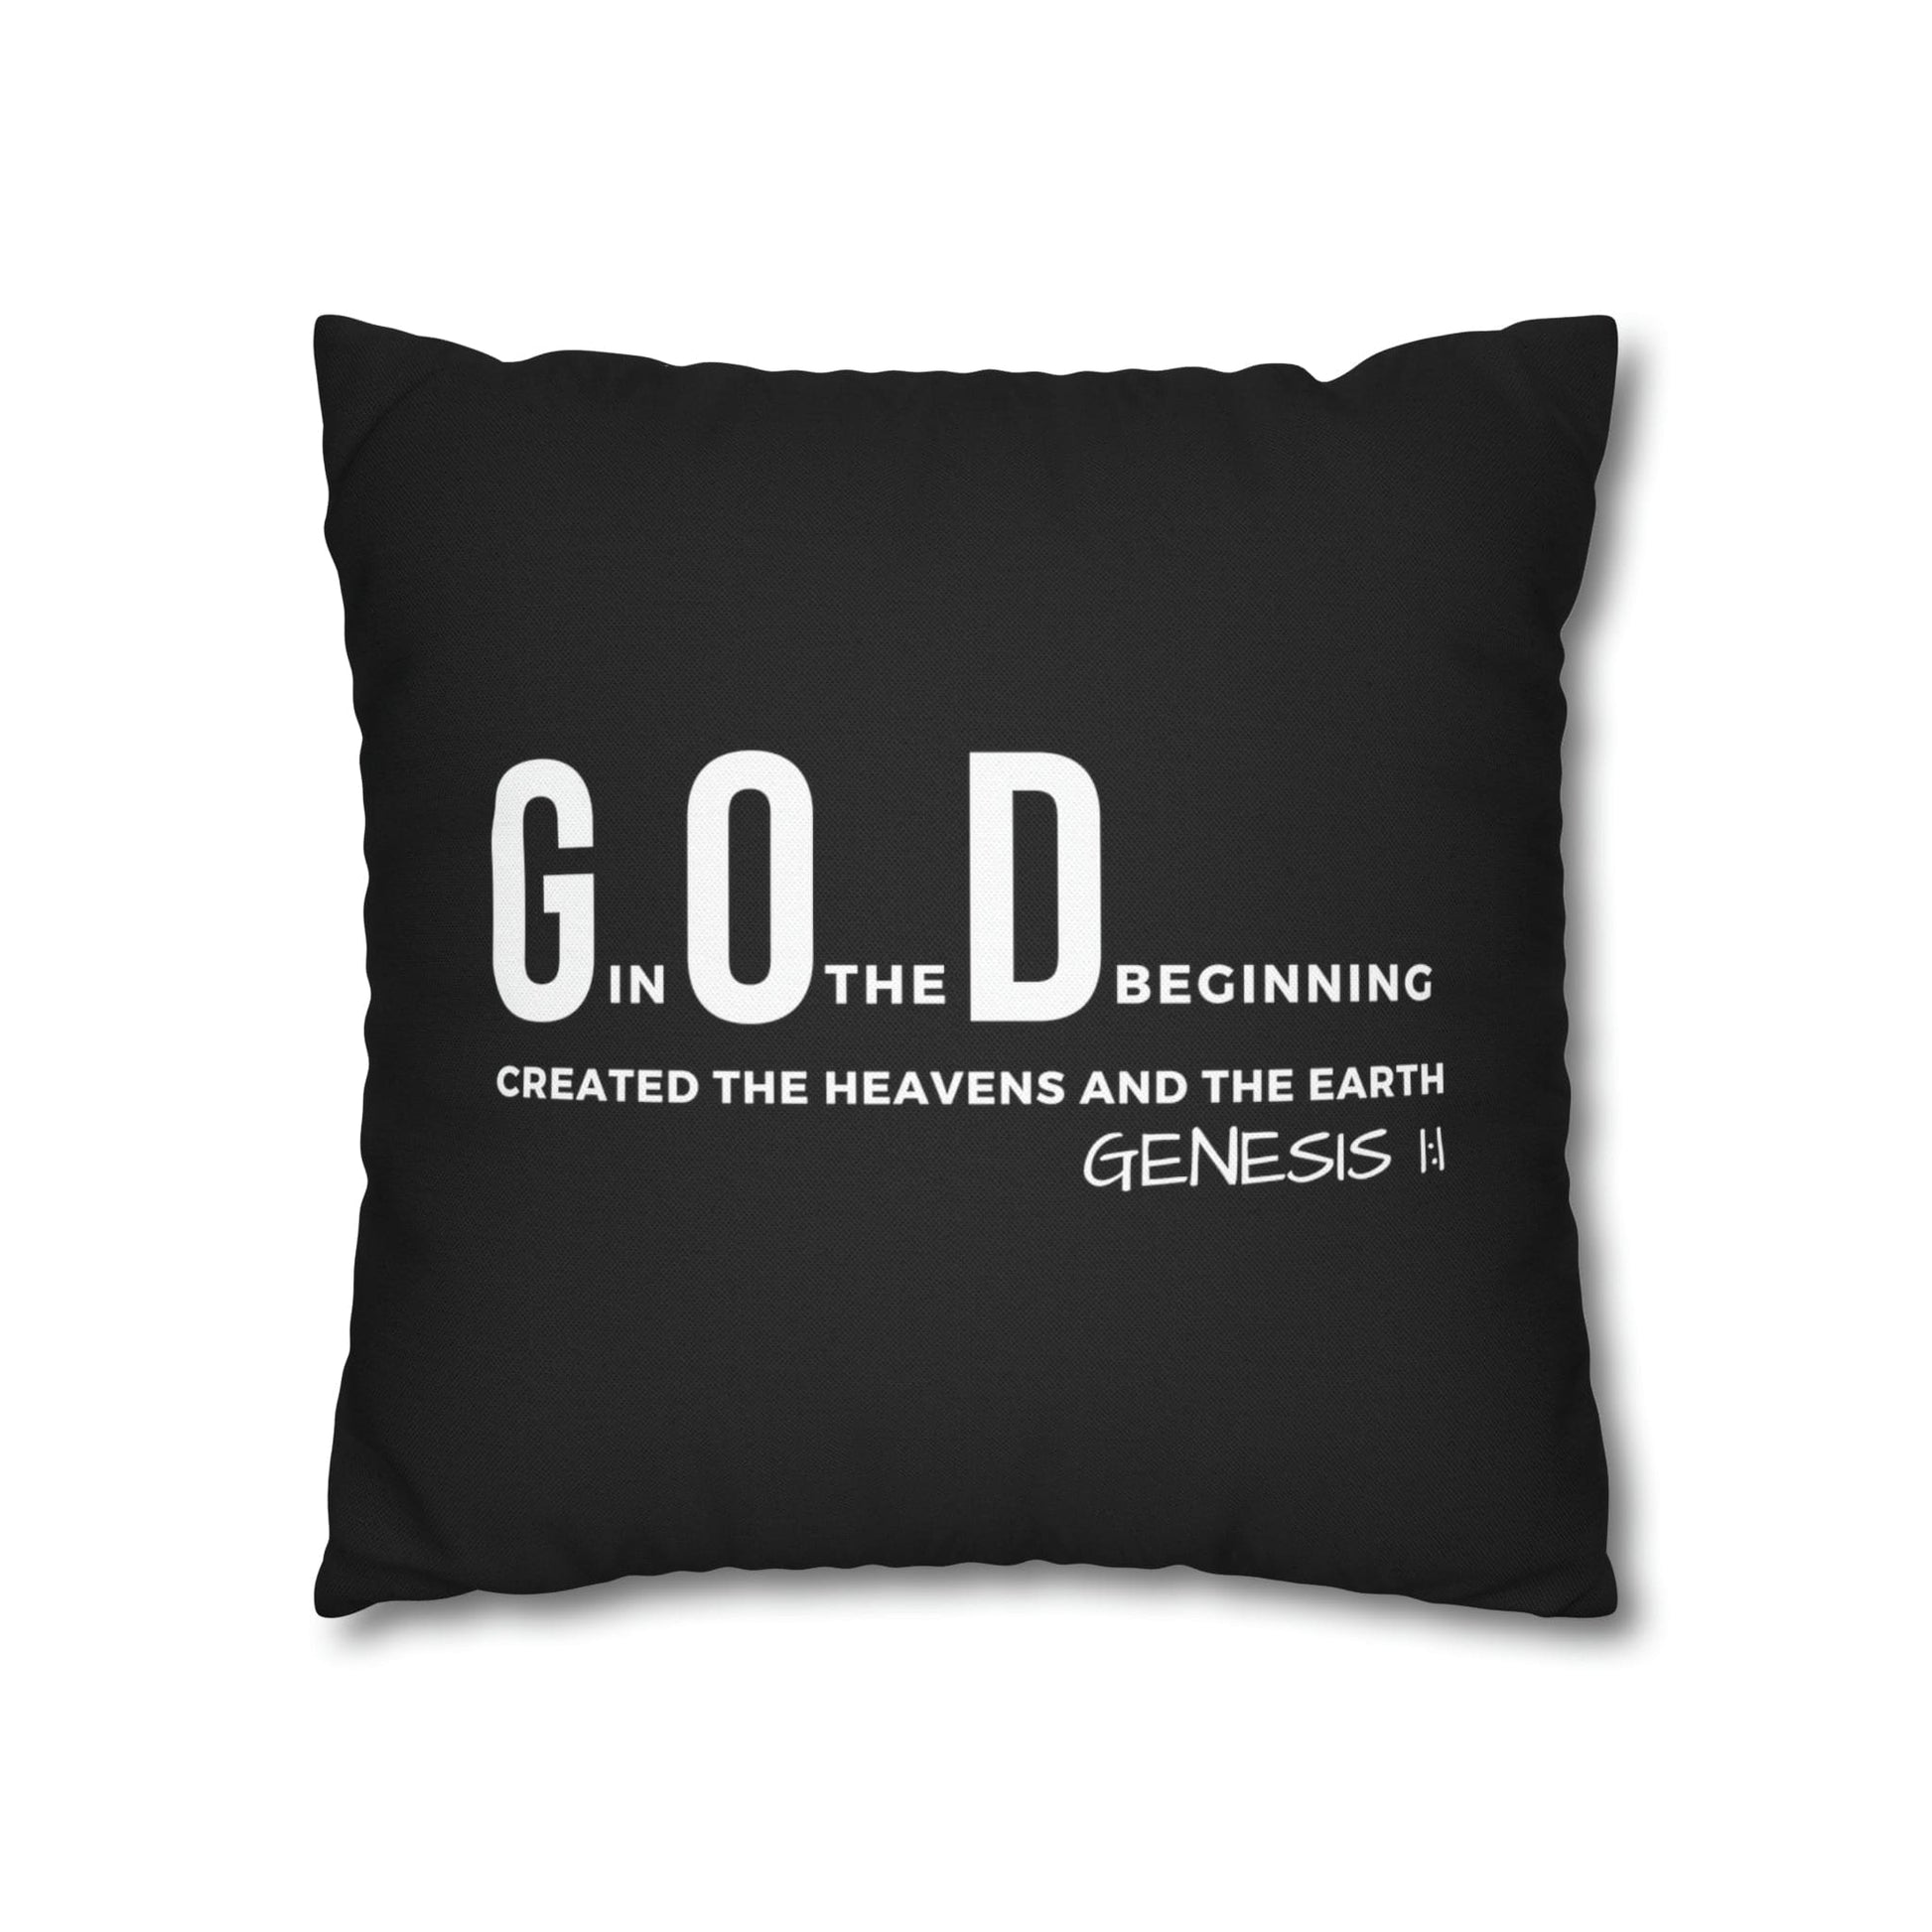 Decorative Throw Pillow Cover - Set Of 2, God In The Beginning Created The Heavens And The Earth - Scripture Verse-17